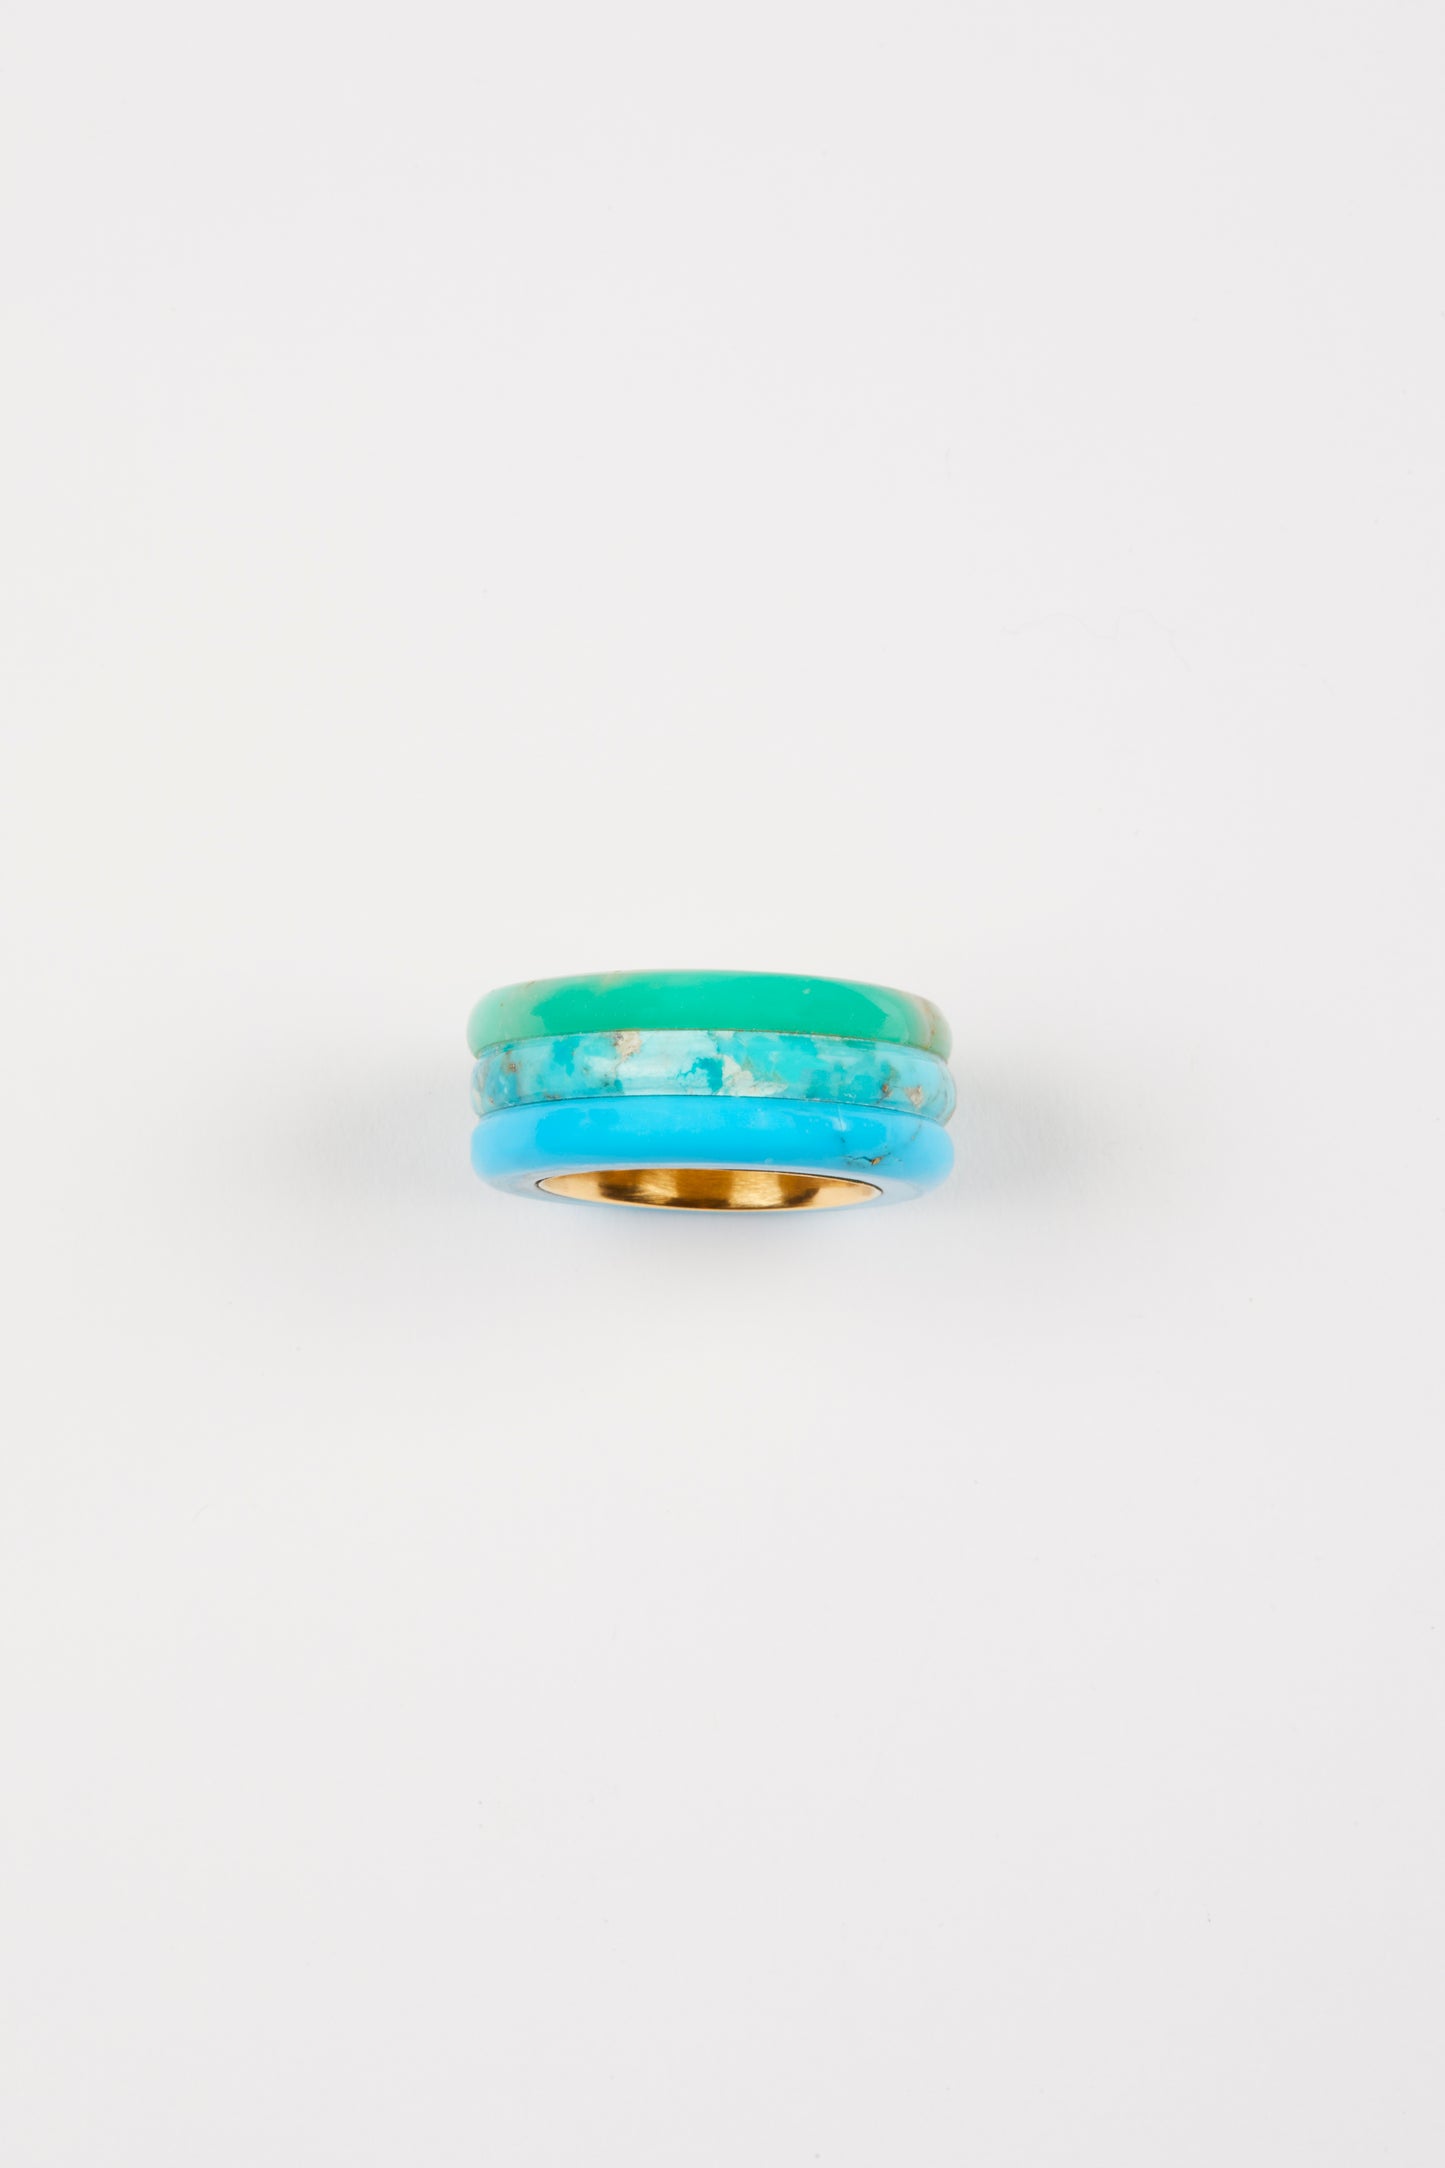 Chrysoprase and Turquoise Stacked Ring with Gold Lining